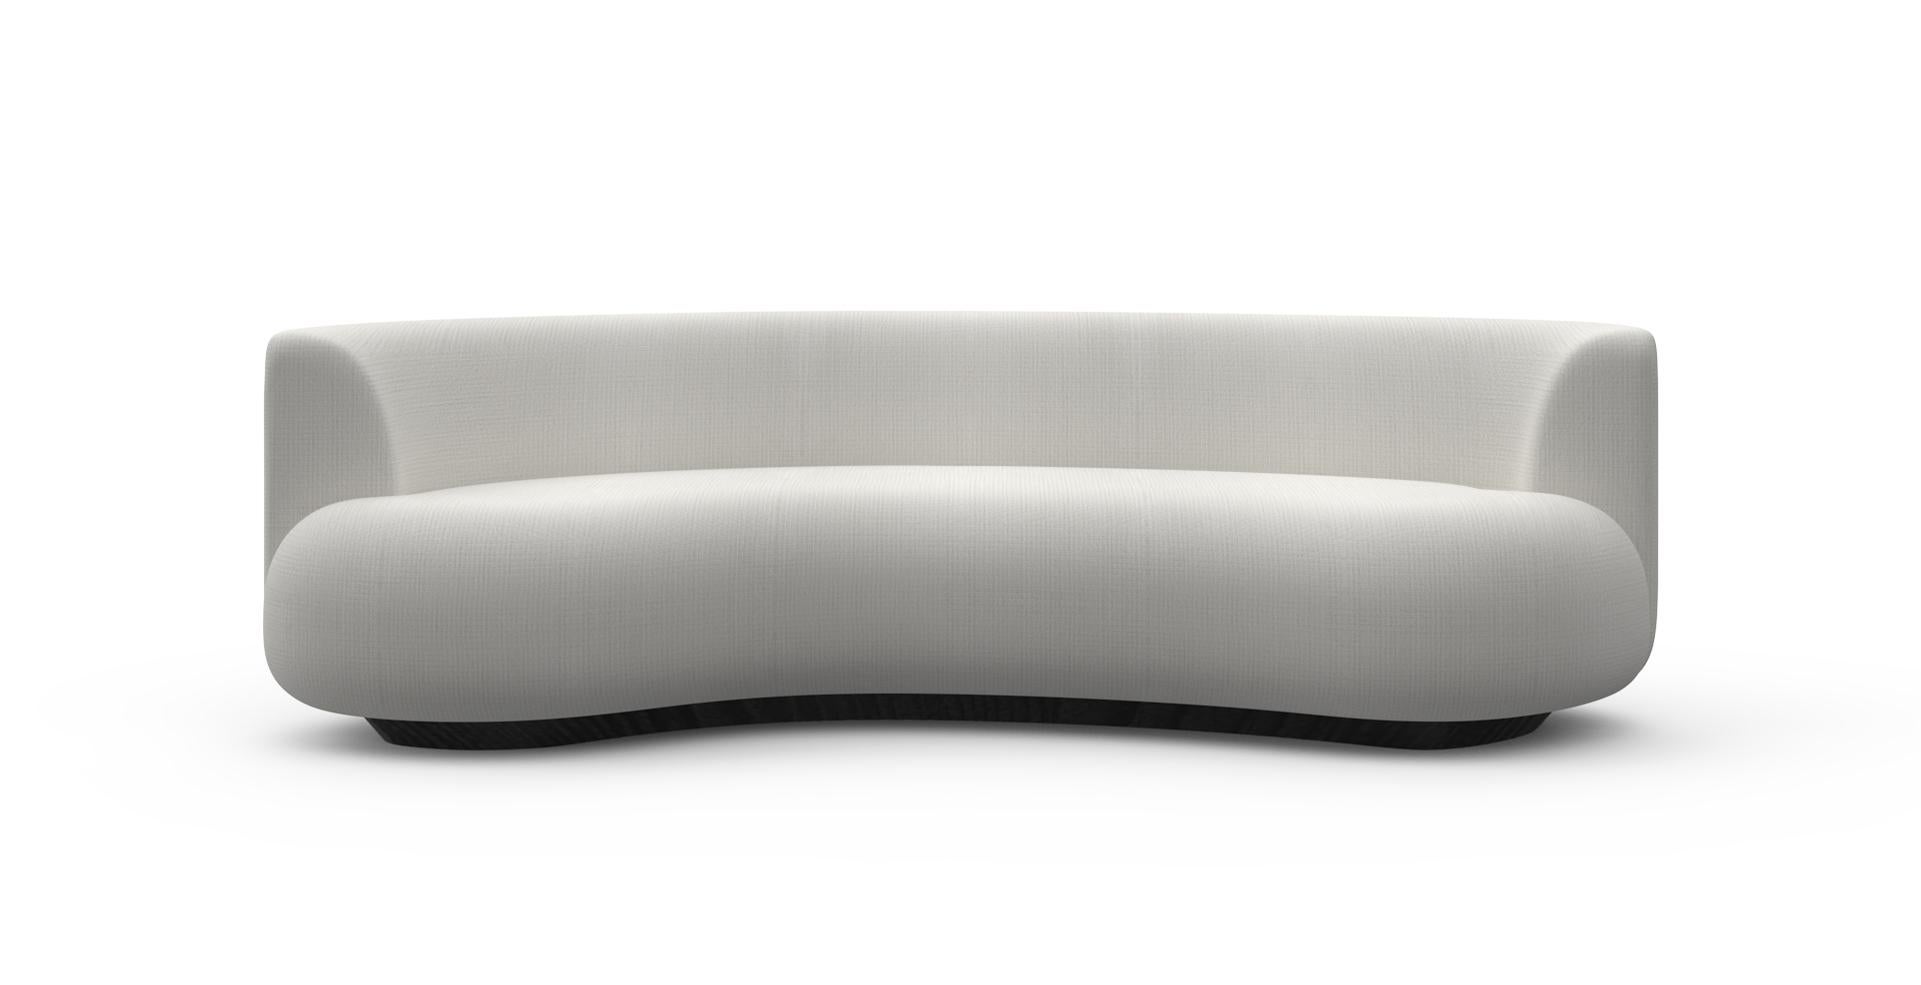 Twins Sofa Outdoors, Contemporary Collection, Handcrafted in Portugal - Europe by Greenapple.
 
Designed by Rute Martins for the Contemporary Collection, the Twins outdoors couch and day bed share the same genes, yet each possesses a distinct